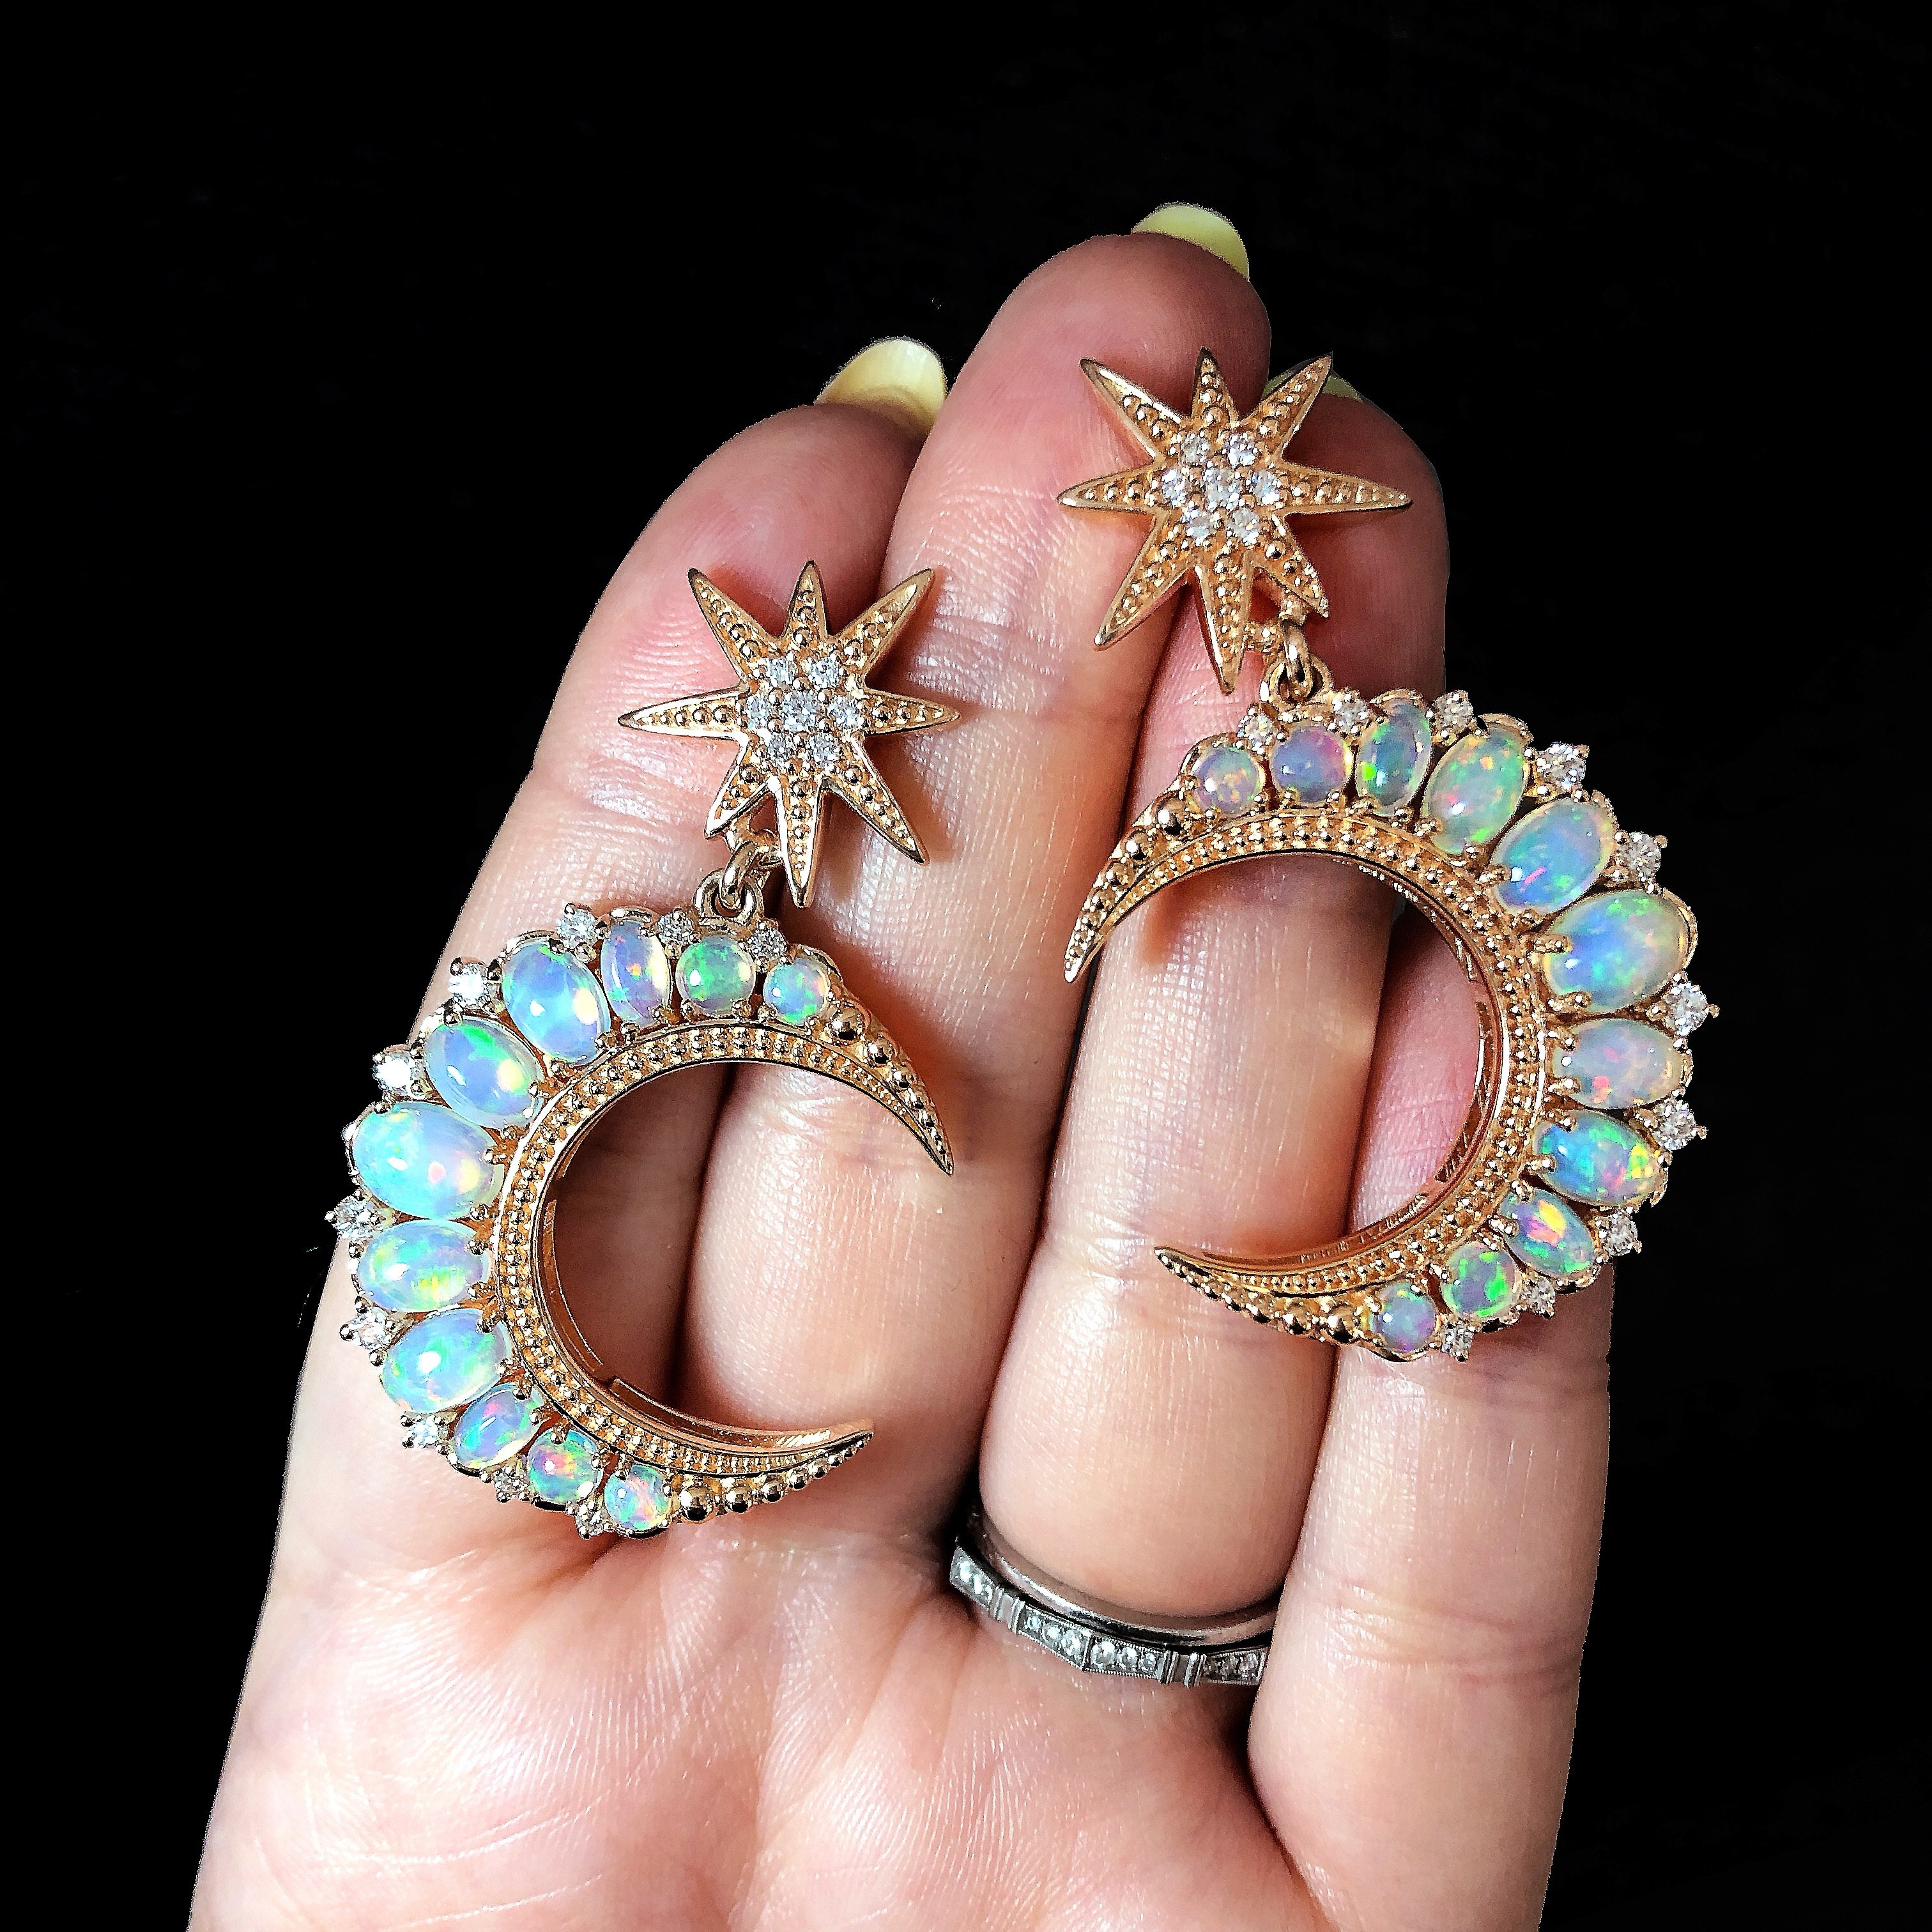 I love these rose gold and opal crescent moon earrings by Dallas Prince Designs.